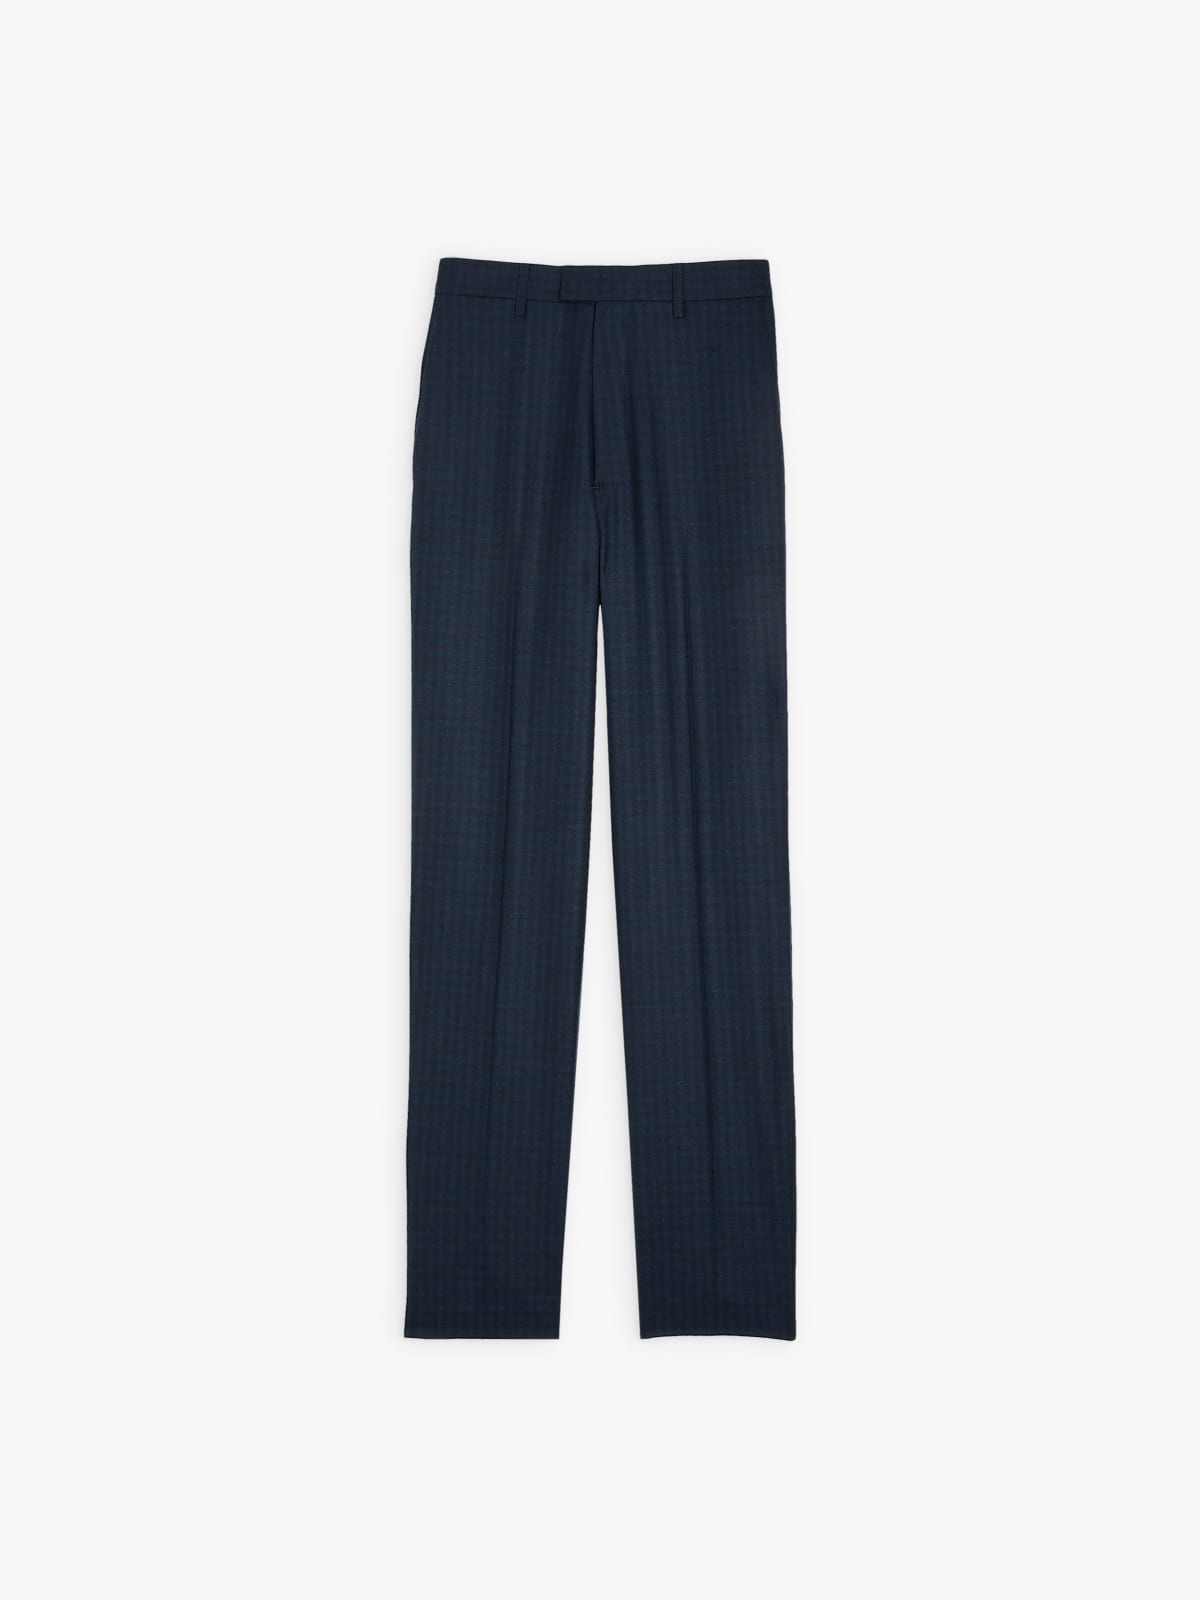 navy blue new Jamming pants in wool and cashmere